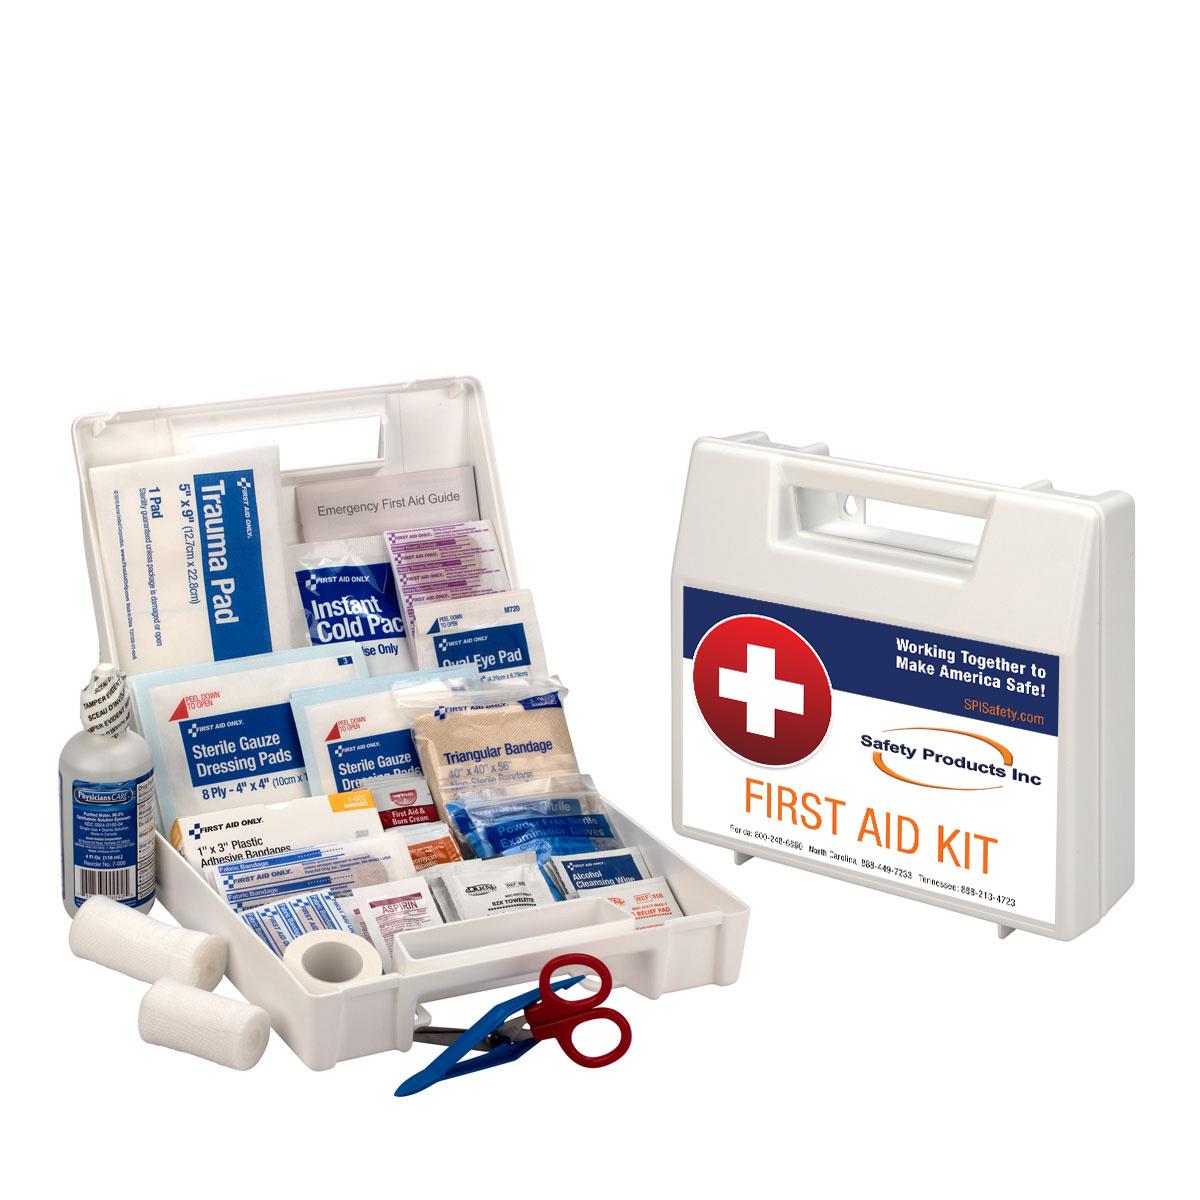 25 Person First Aid Kit